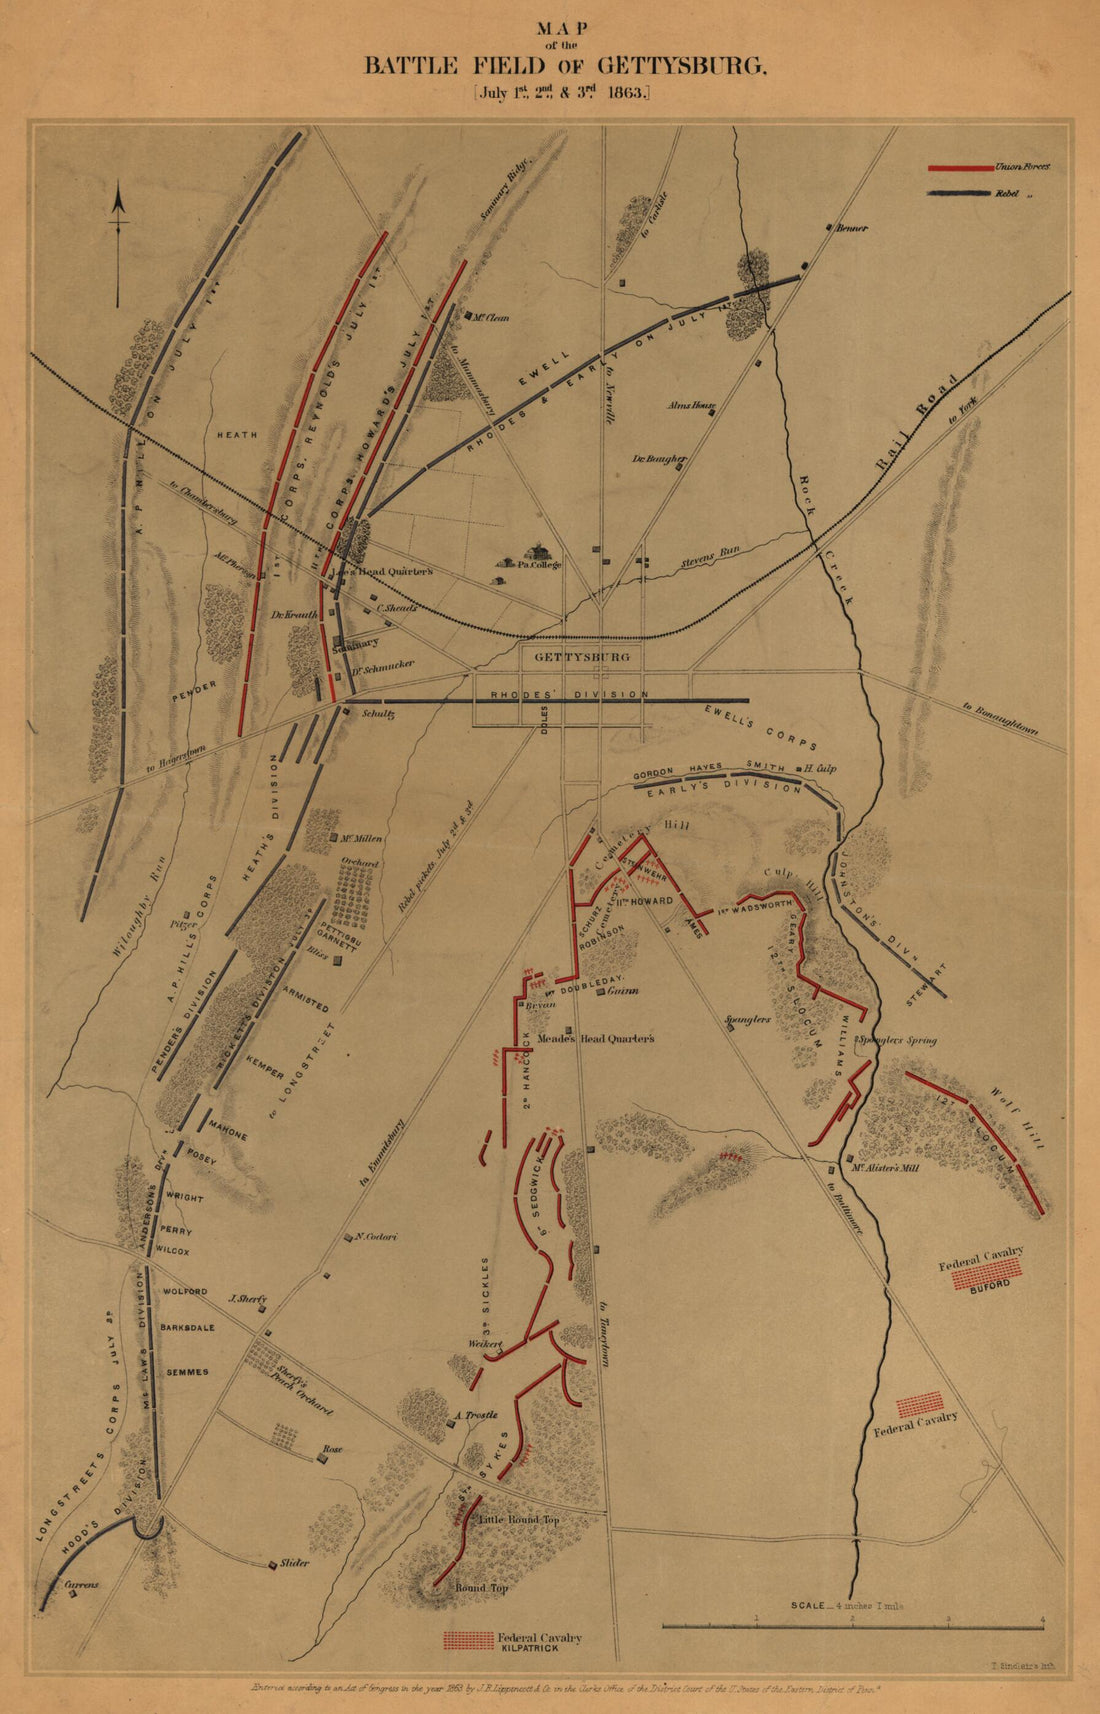 This old map of Map of the Battle Field of Gettysburg. July 1st, 2nd, and 3rd 1863 from 1864 was created by  J.B. Lippincott Company in 1864